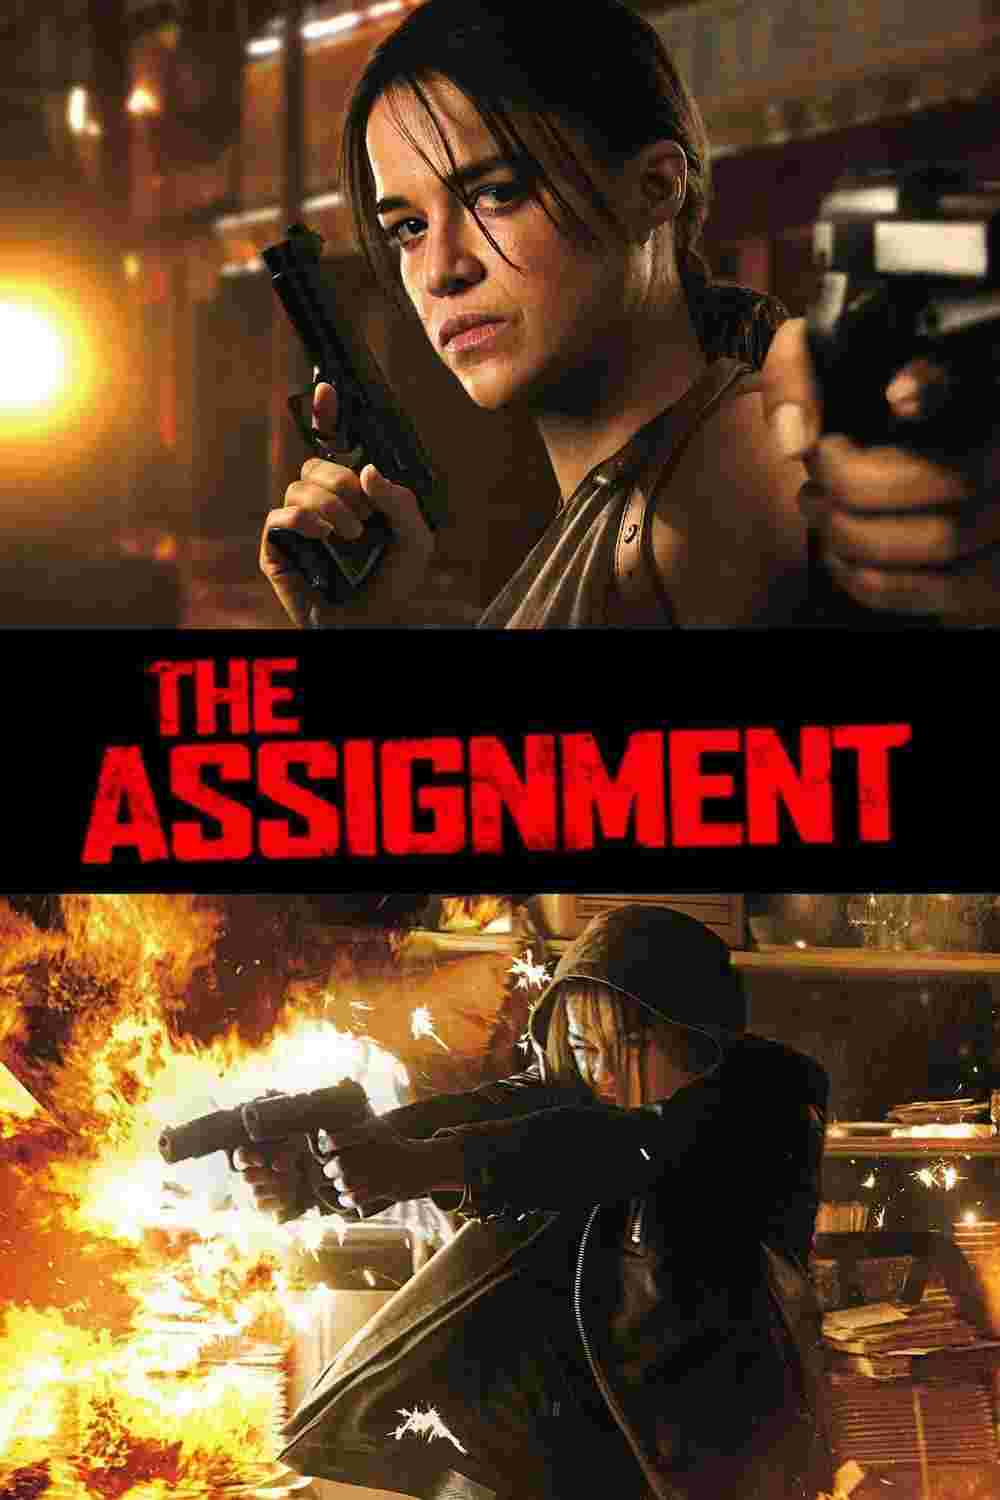 The Assignment (2016) Michelle Rodriguez